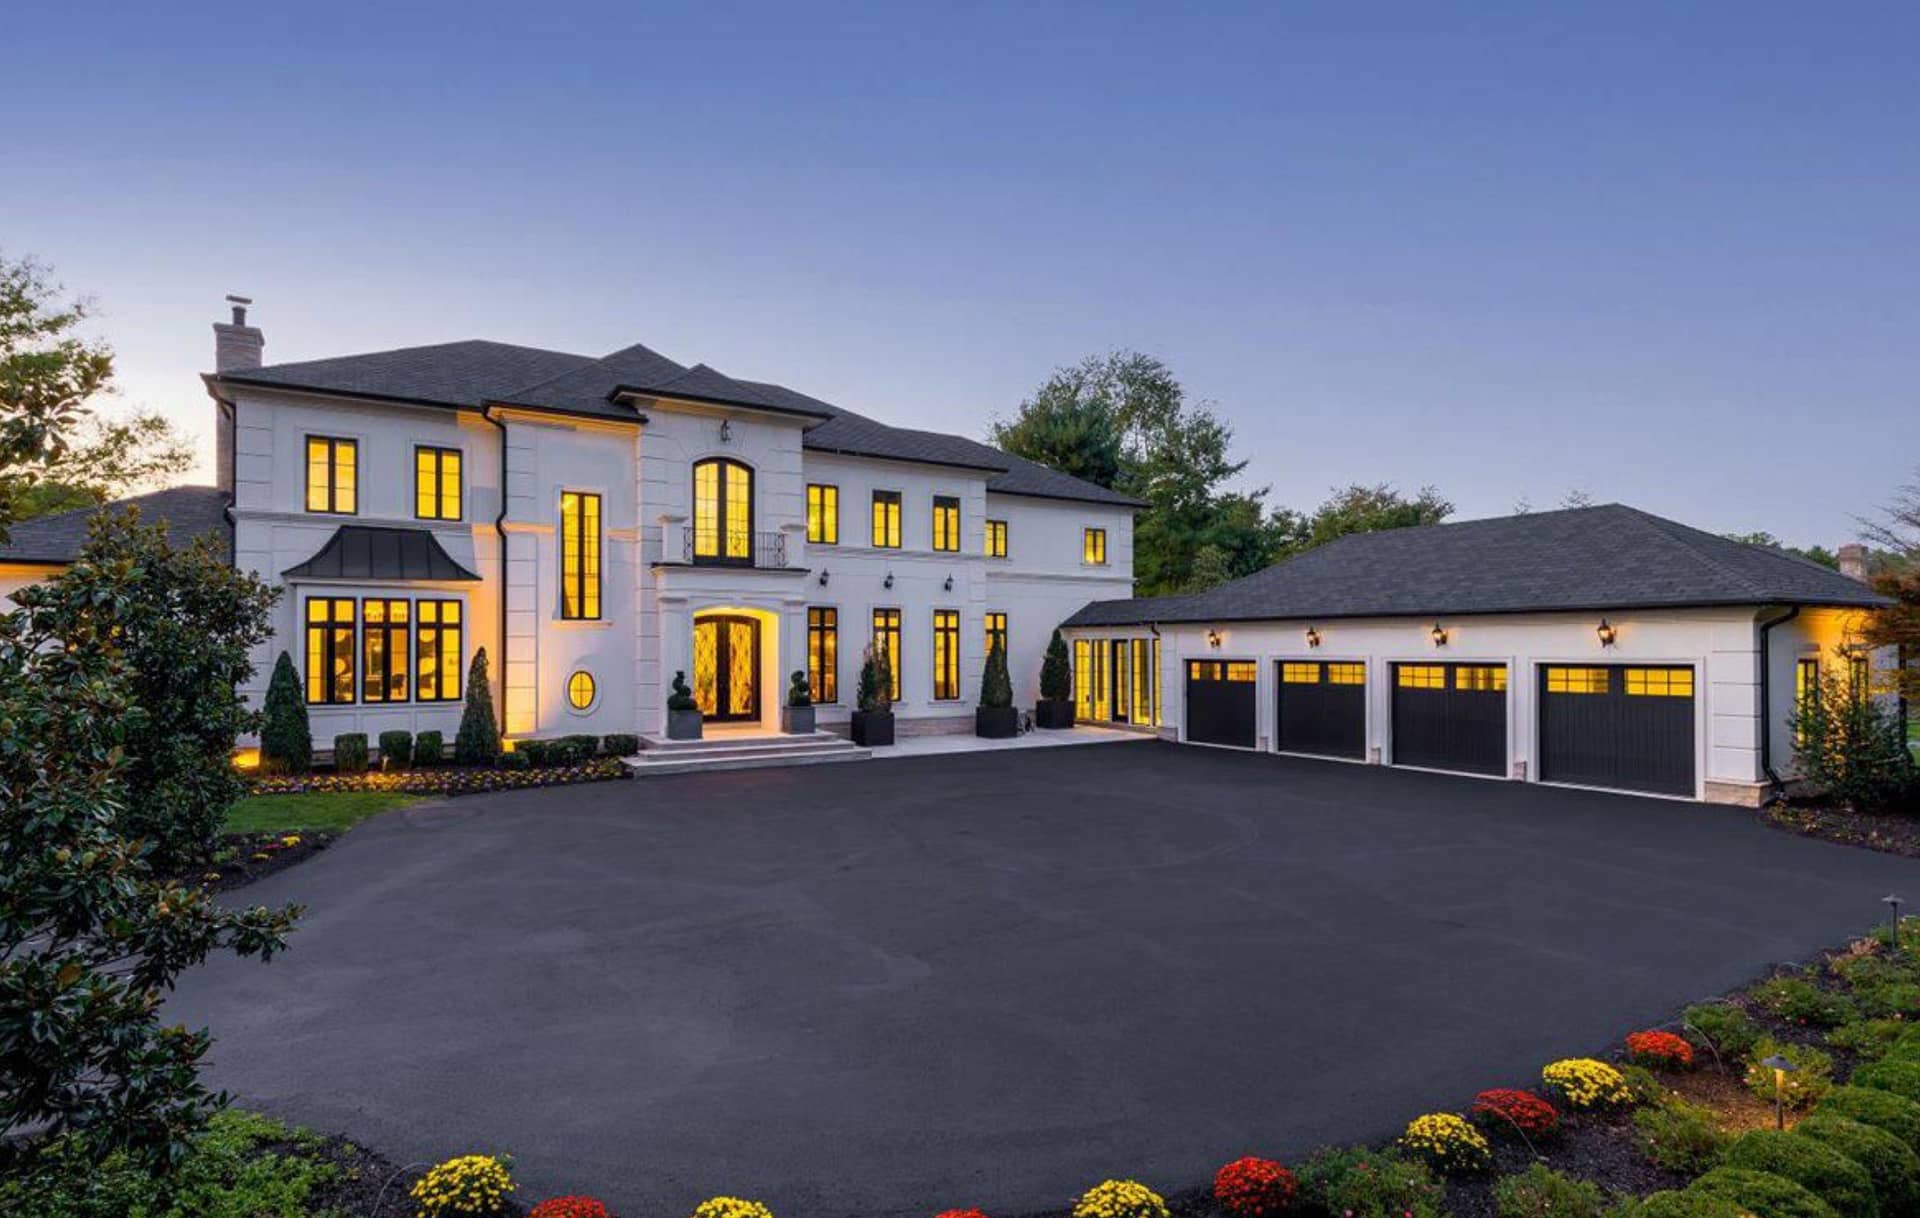 Maryland Home With Indoor Basketball Court (PHOTOS)